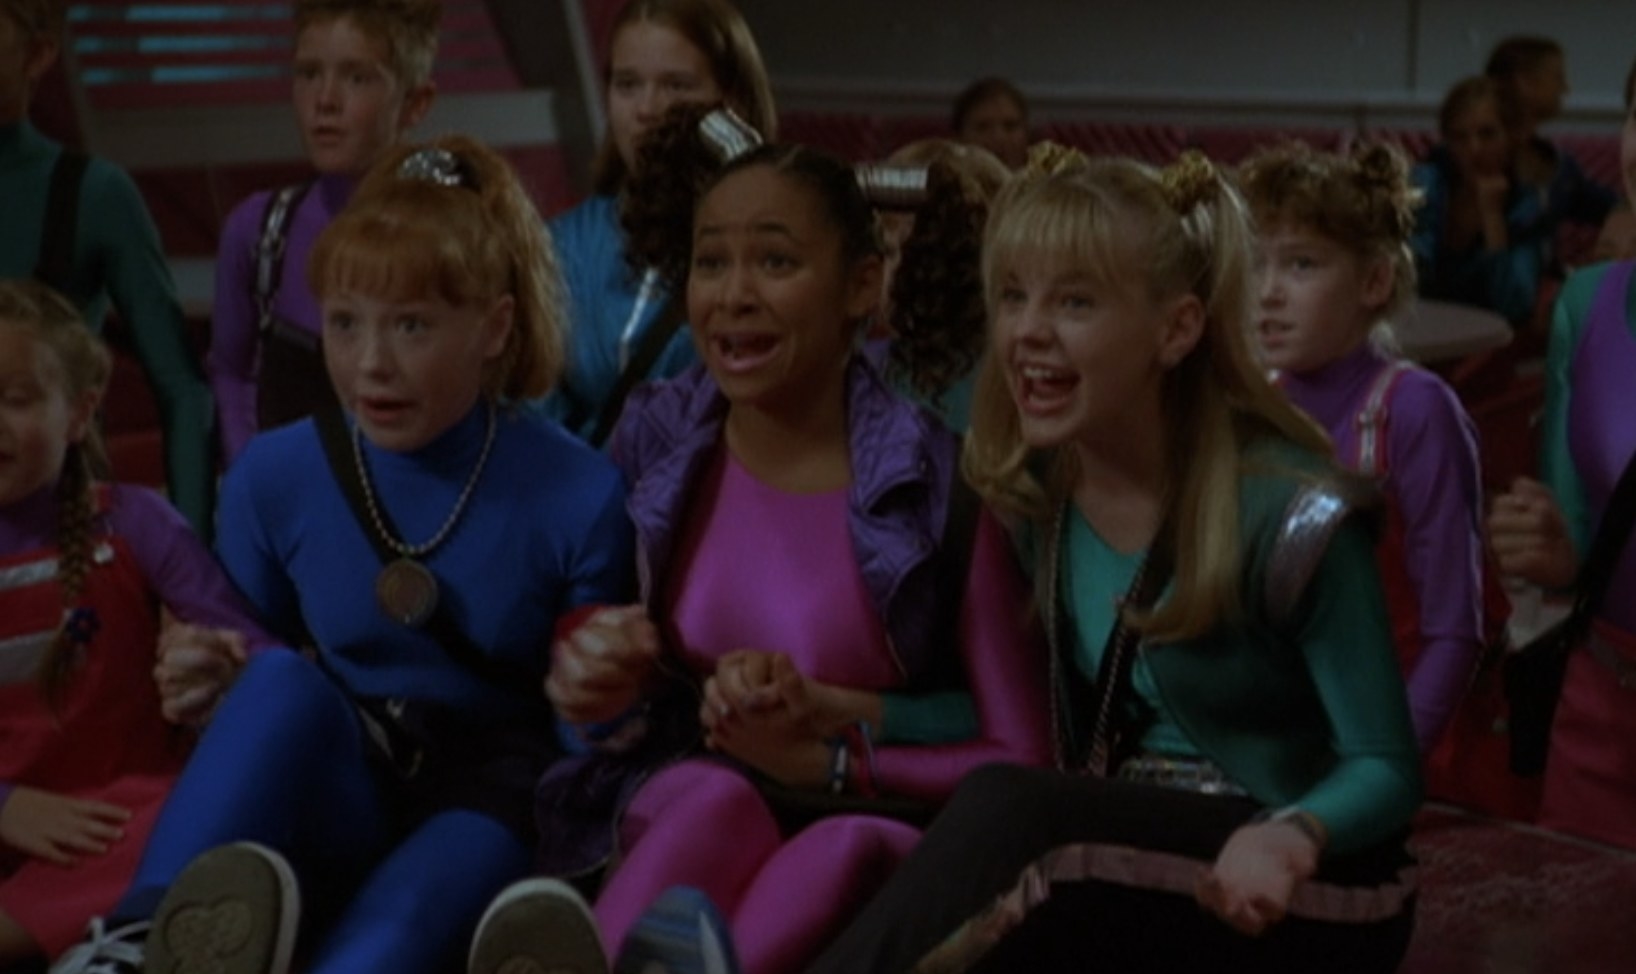 Zenon and her friends exciting over music together in Zenon: Girl of the 21st Century